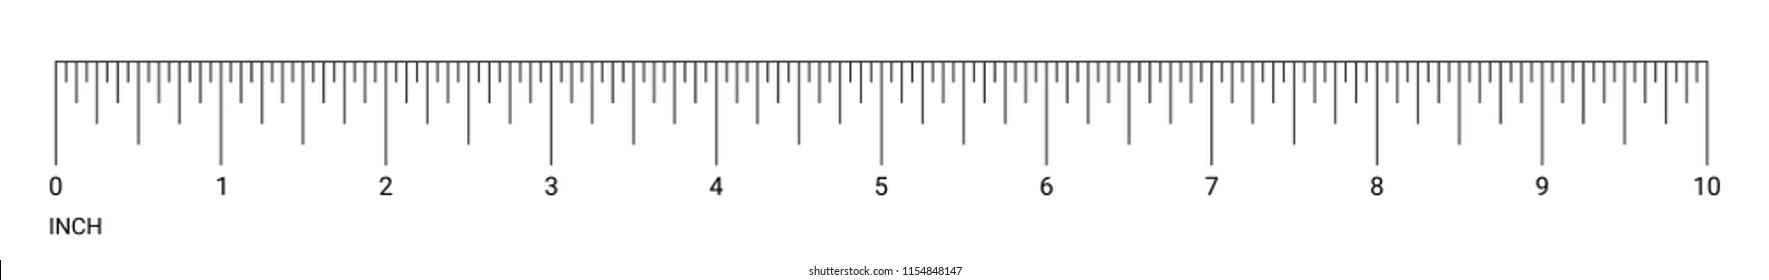 images of a ruler in inches